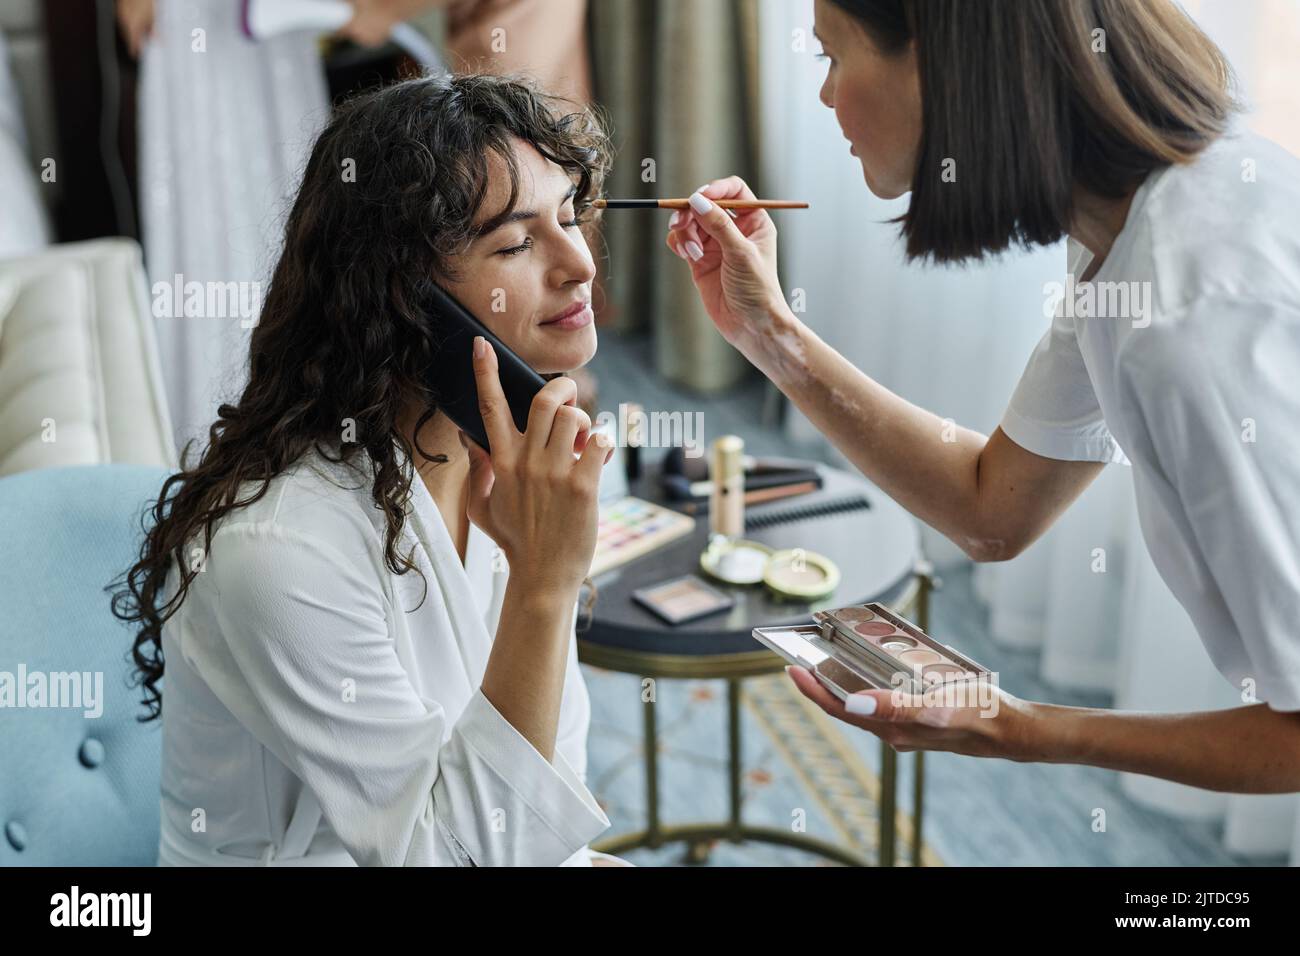 Young smiling brunette woman in white bathrobe talking on mobile phone while makeup artist applying eye shadows on her eyes Stock Photo